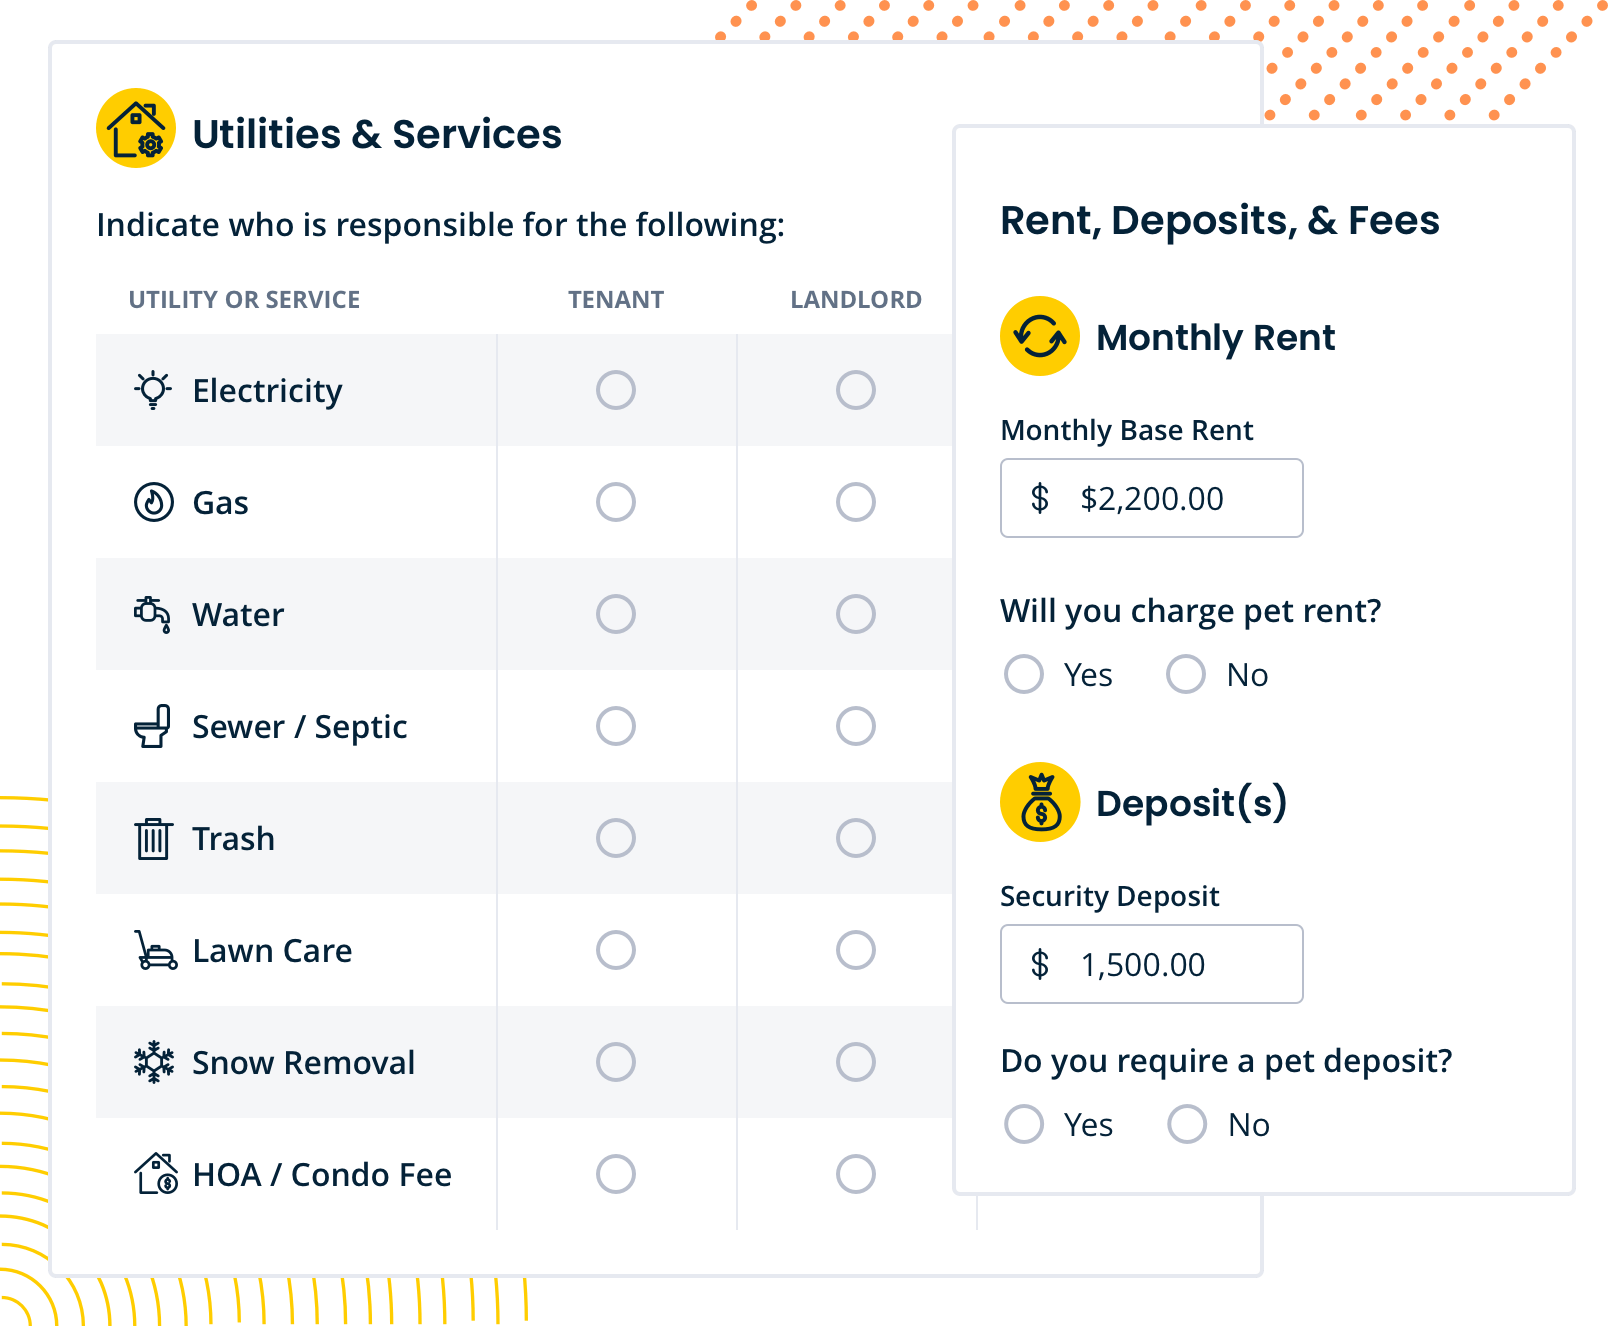 screenshot of lease agreement forms for utilities and services and rent, deposit, and fees